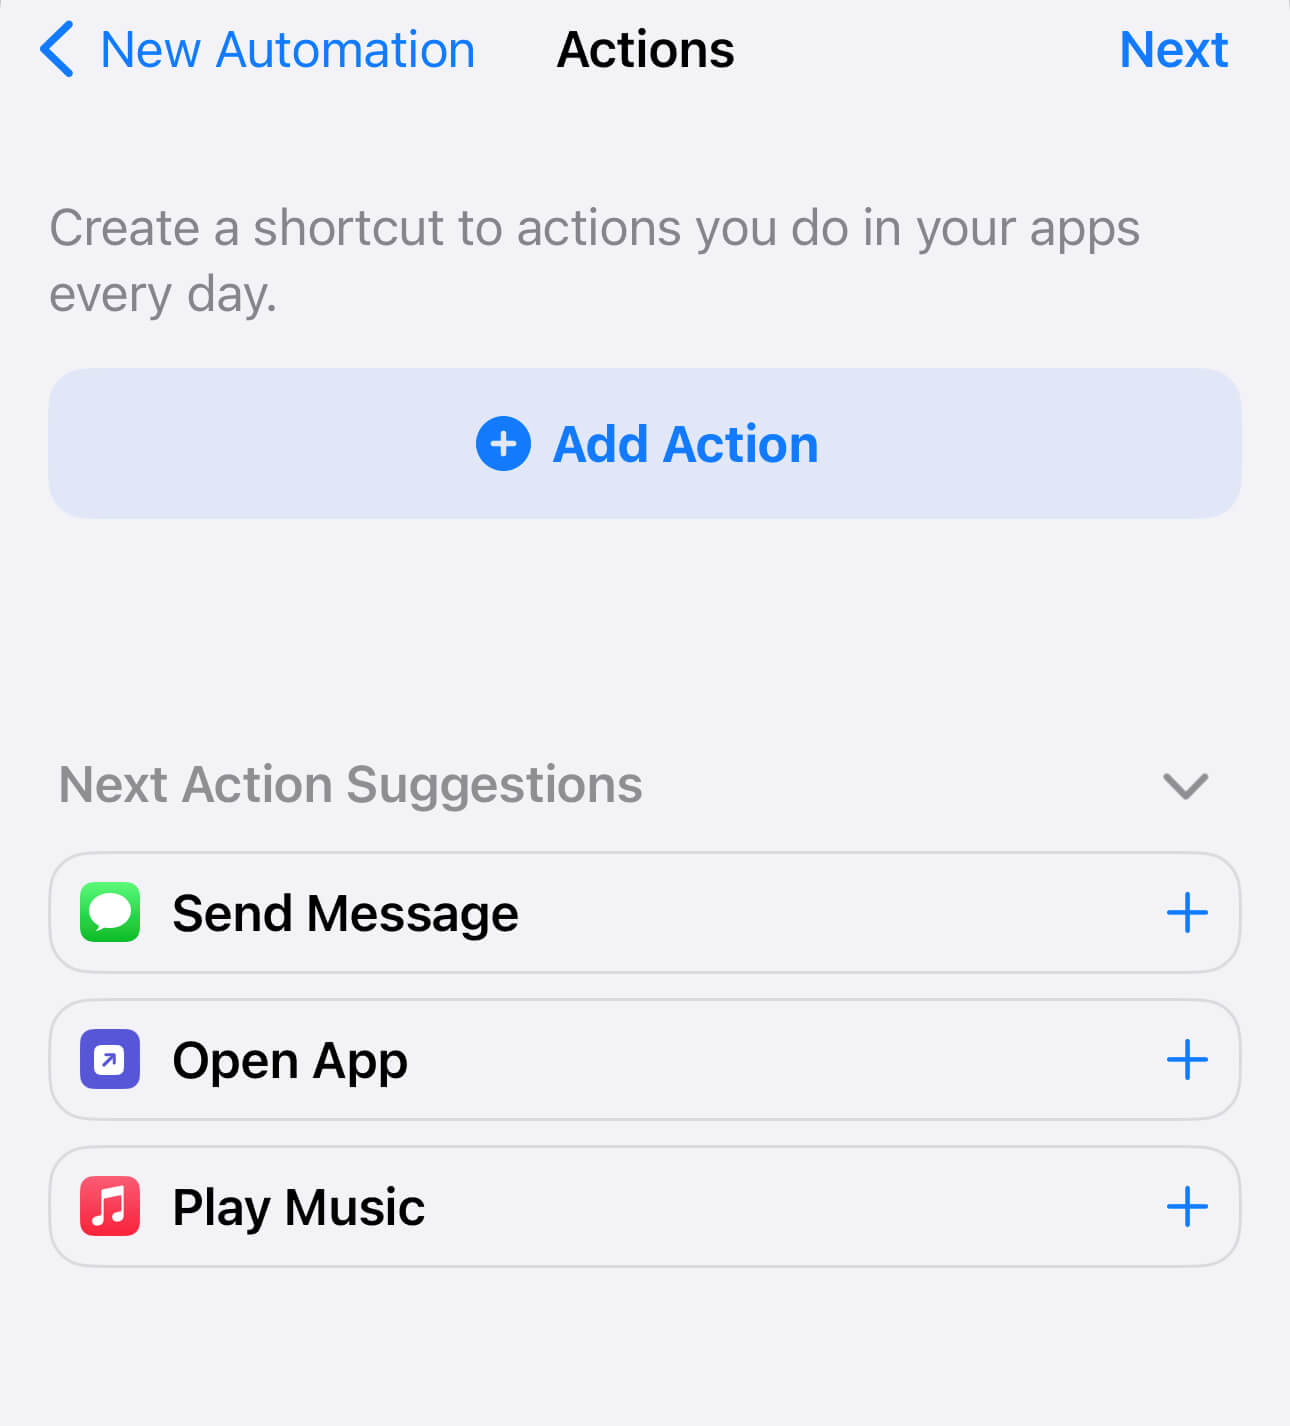 the Add Action button